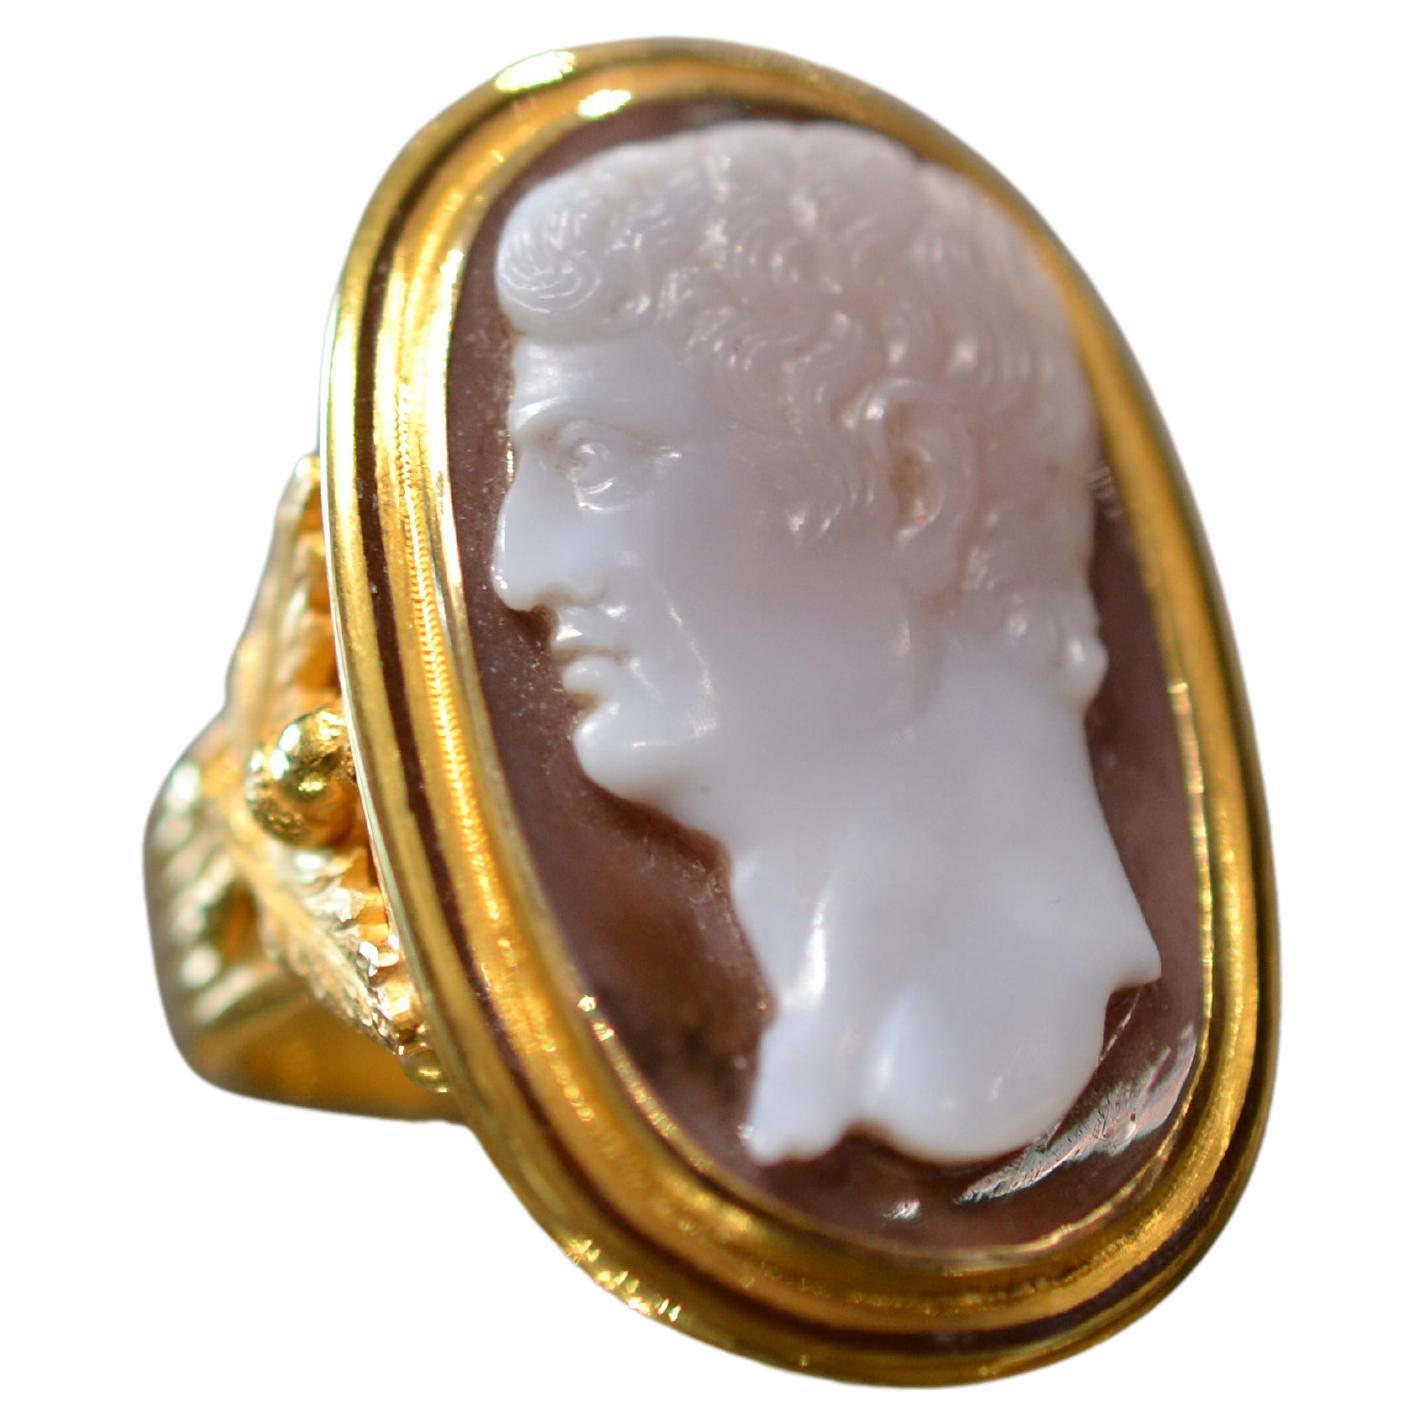 Hardstone Cameo of a Man, 18th-19th Century